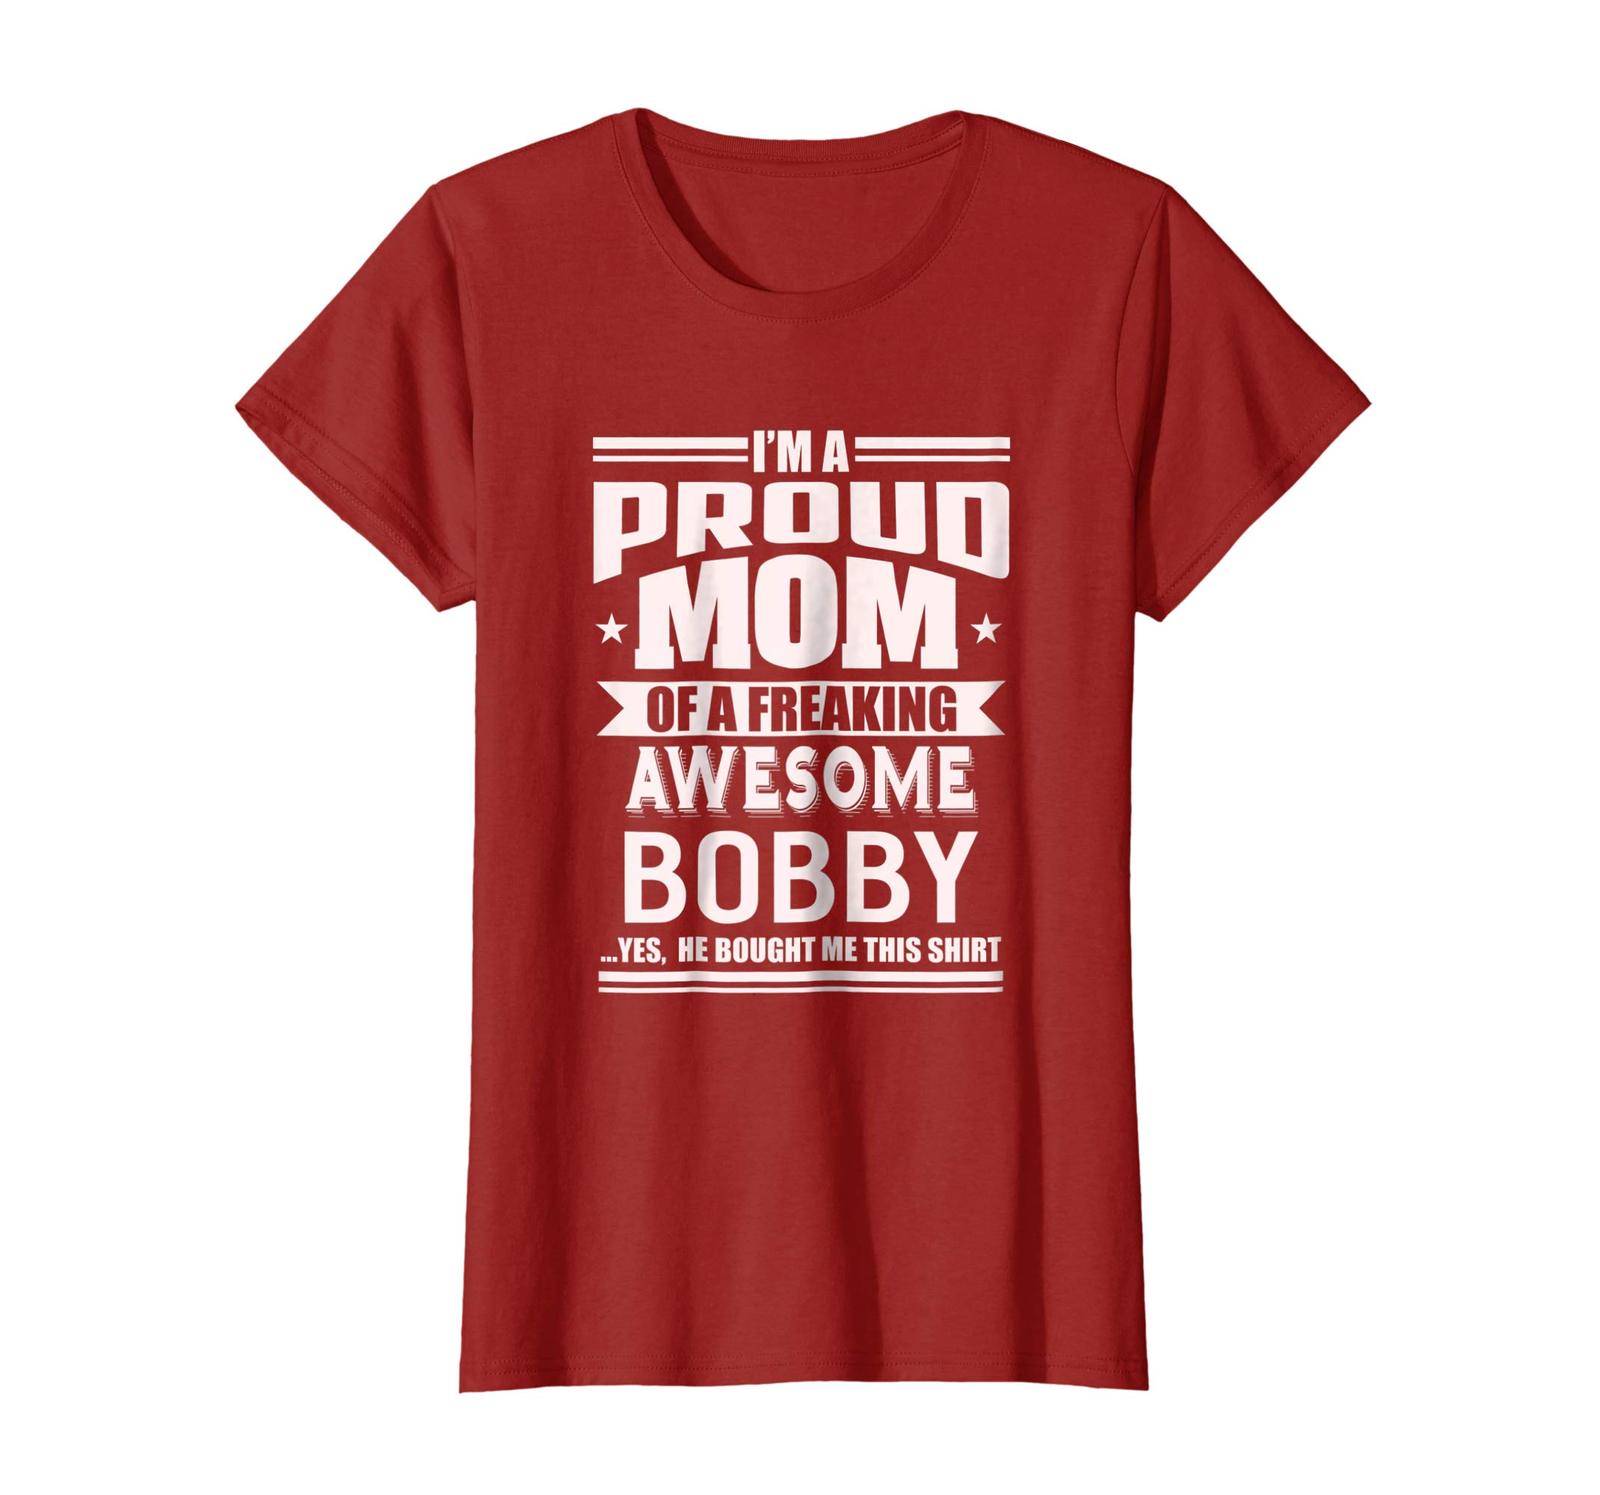 Dog Fashion - Proud Mom of a Awesome Bobby Mother Son Name T-Shirt Wowen